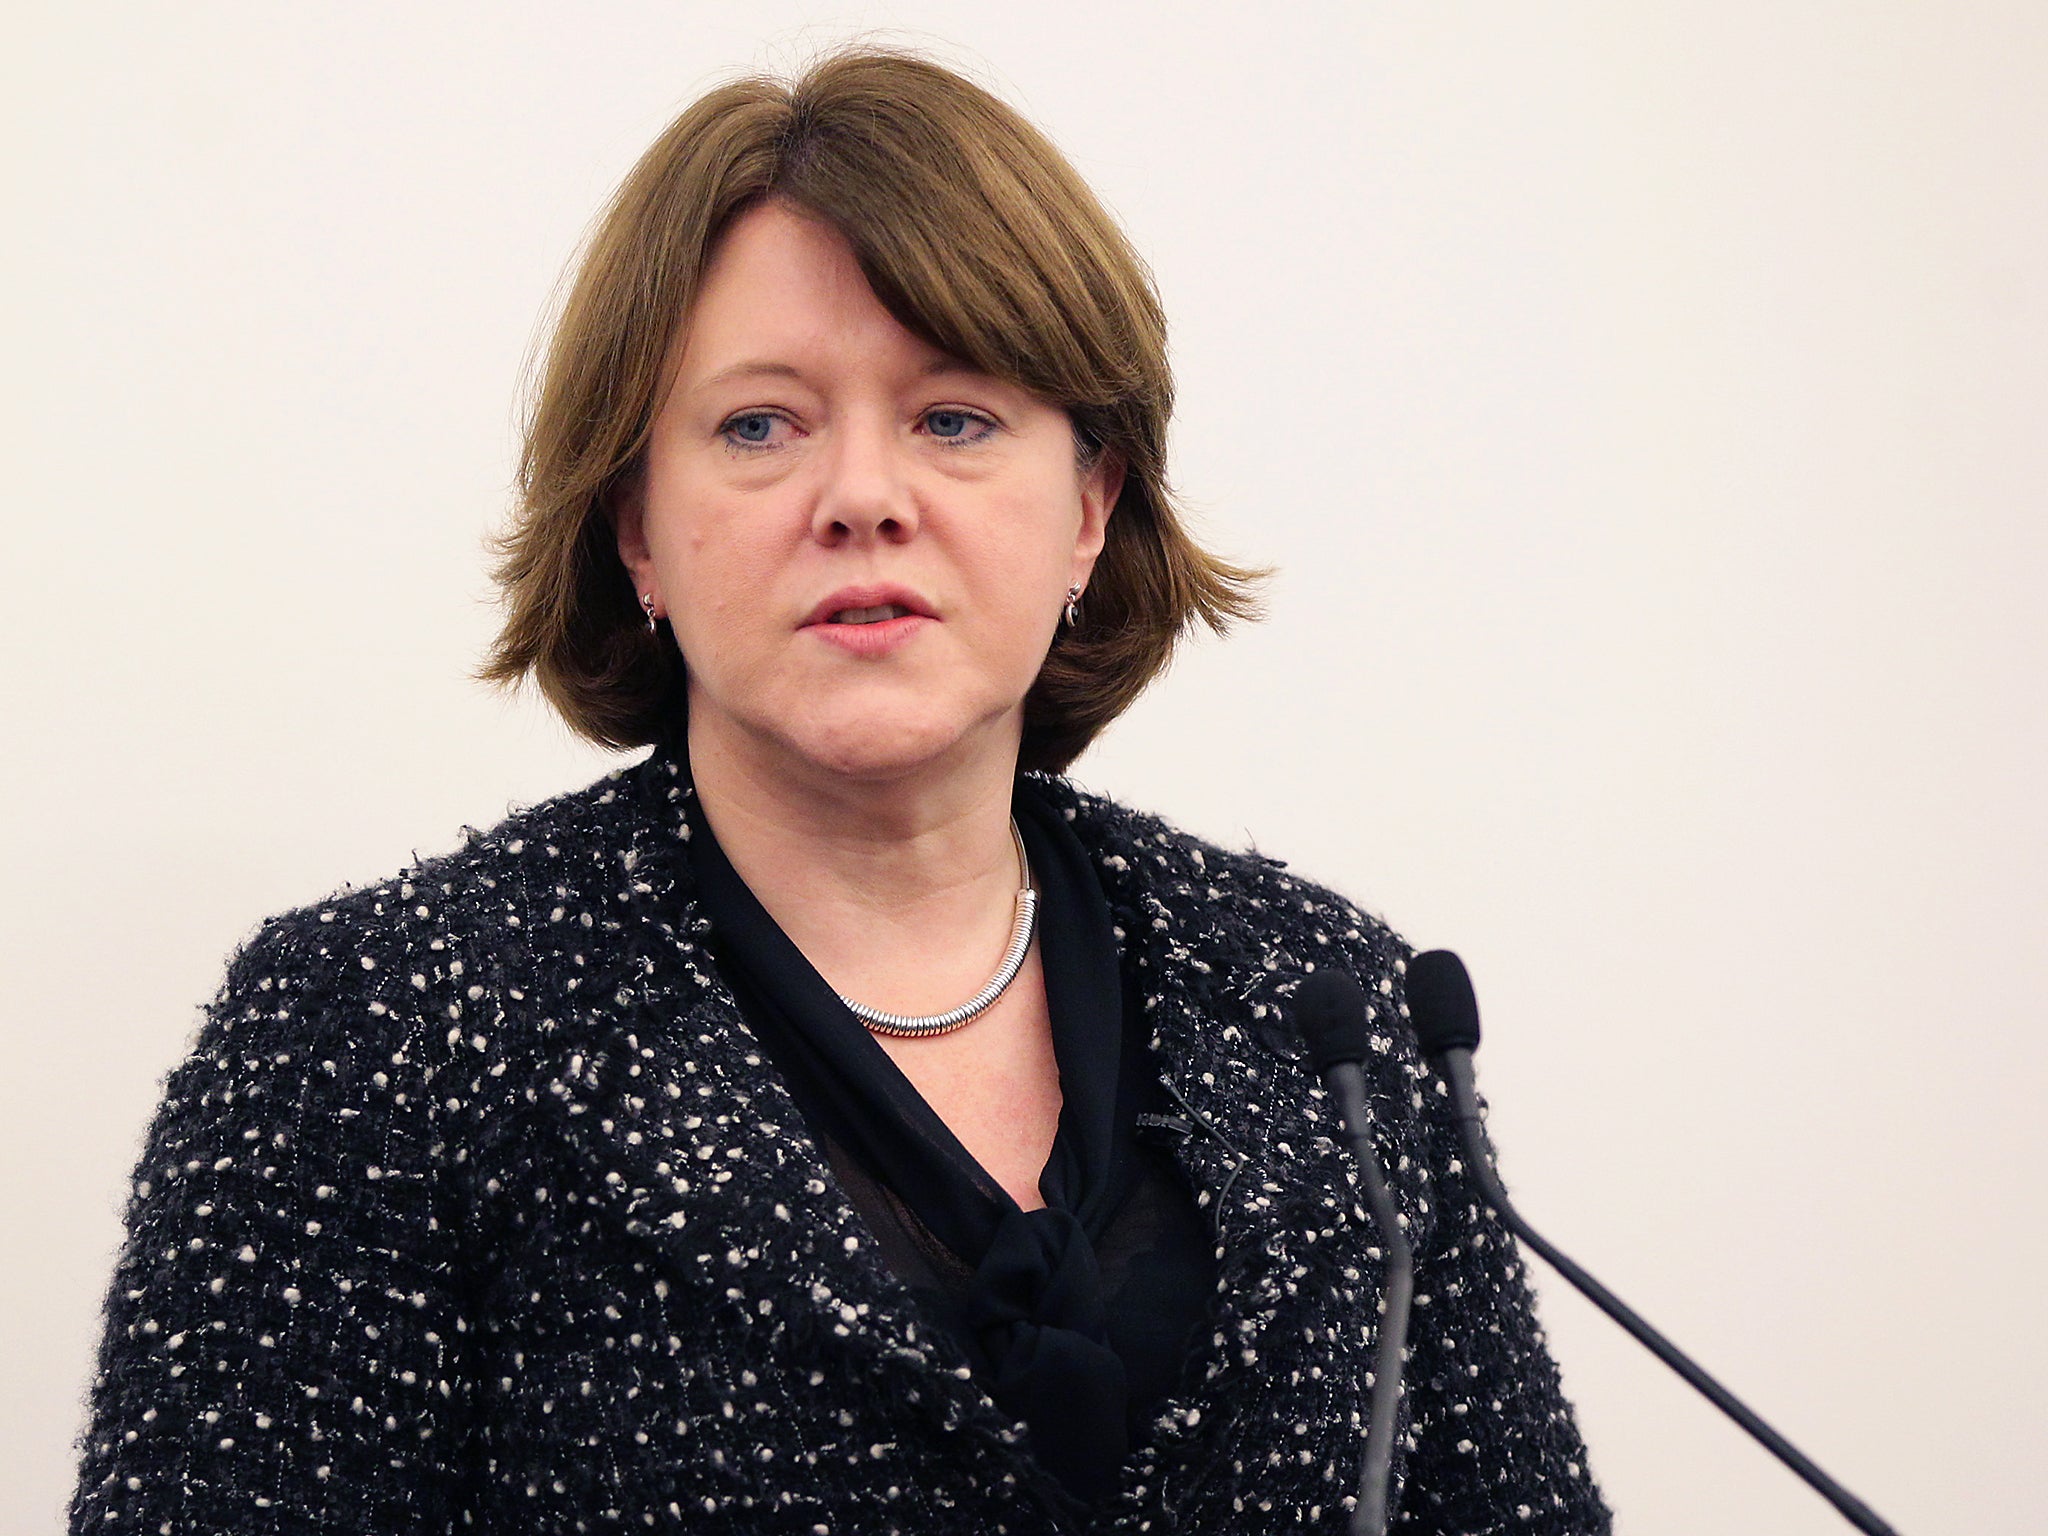 'Age discrimination in the workplace is a serious problem,' said committee chair Maria Miller